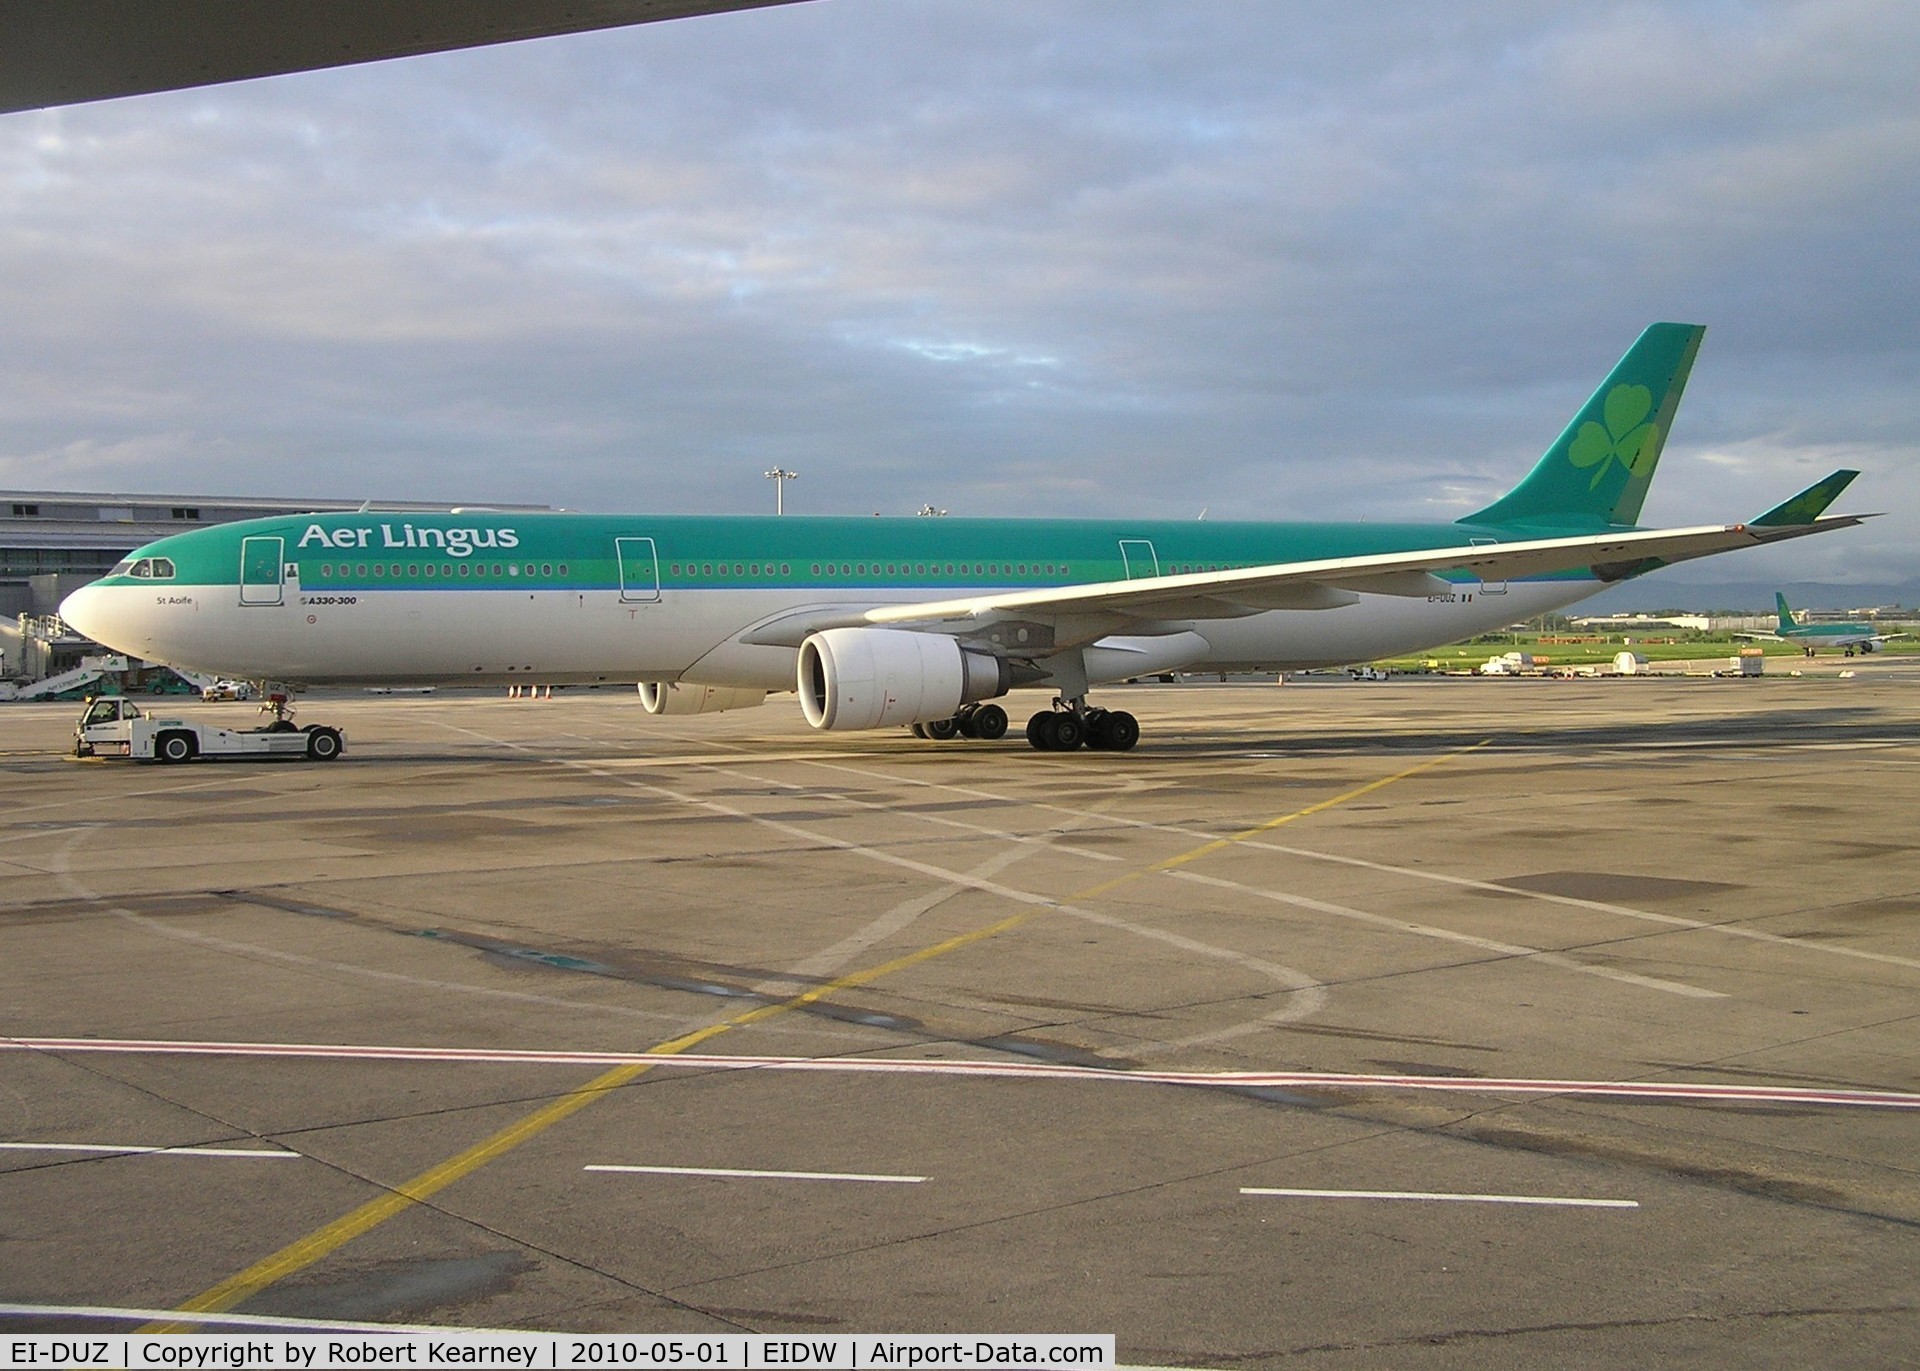 EI-DUZ, 2007 Airbus A330-302 C/N 847, Aer Lingus on tow in the early morning sun